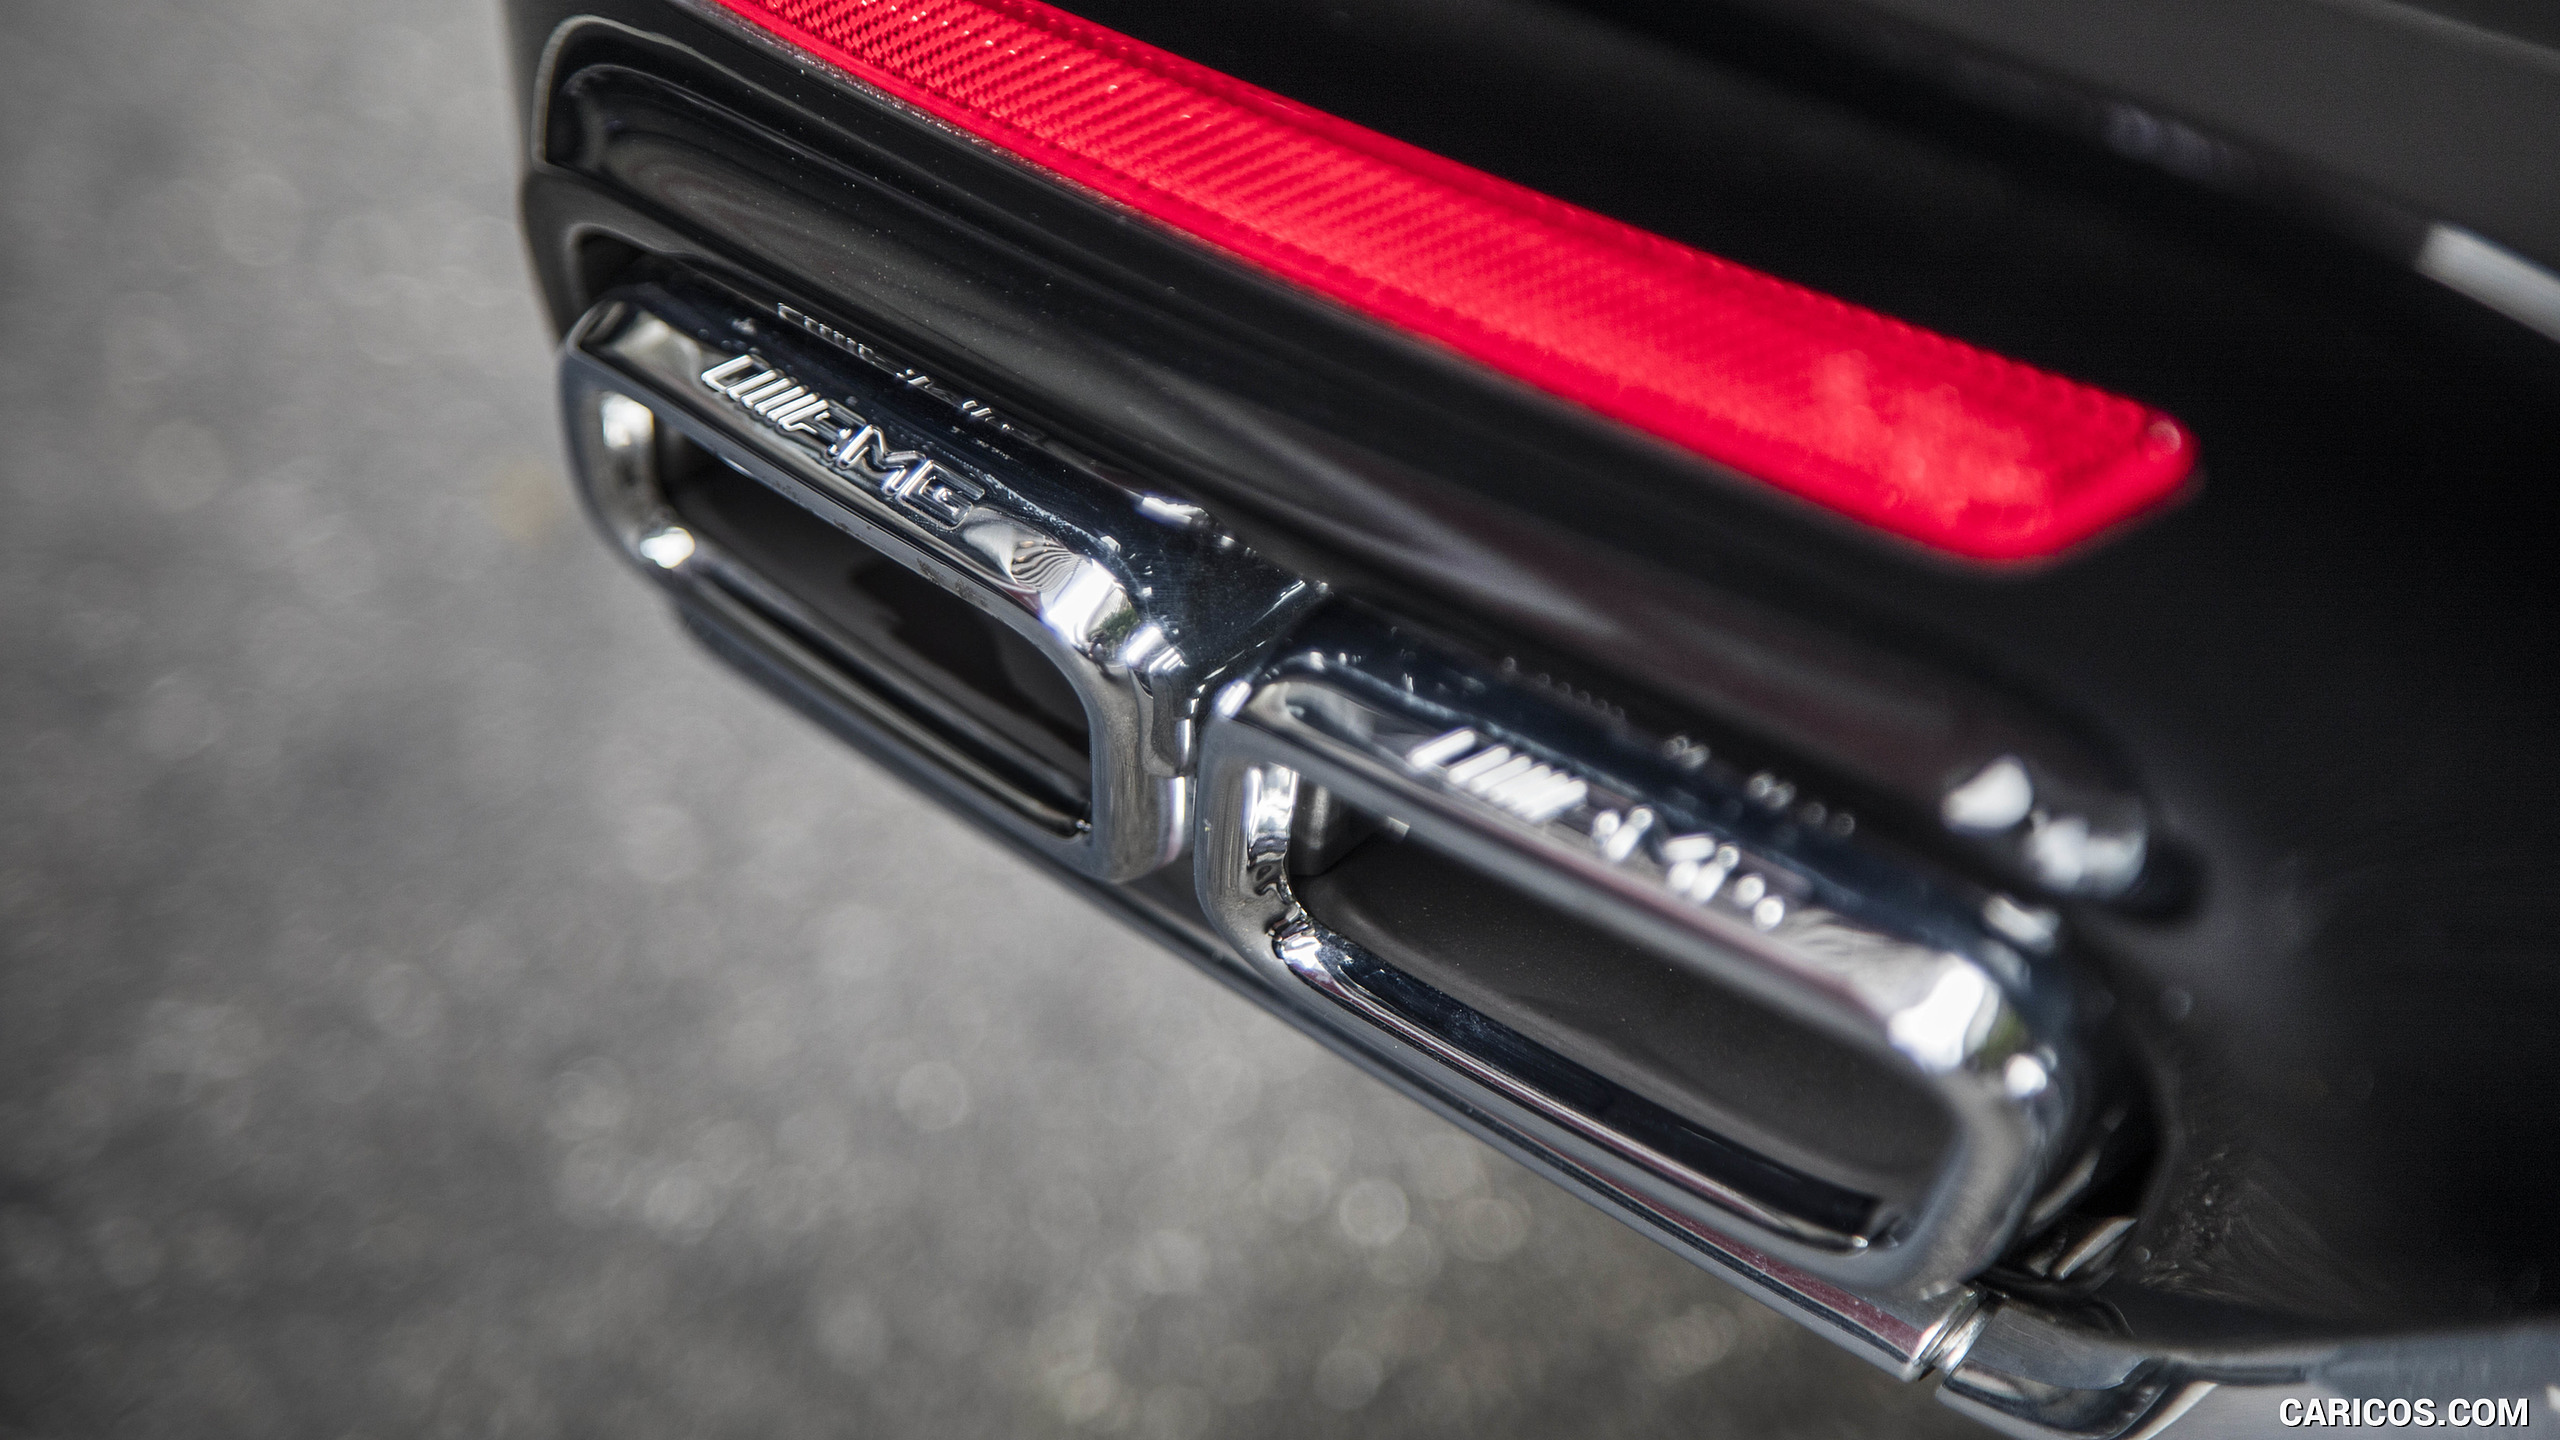 2018 Mercedes-AMG S63 - Tailpipe, #100 of 100